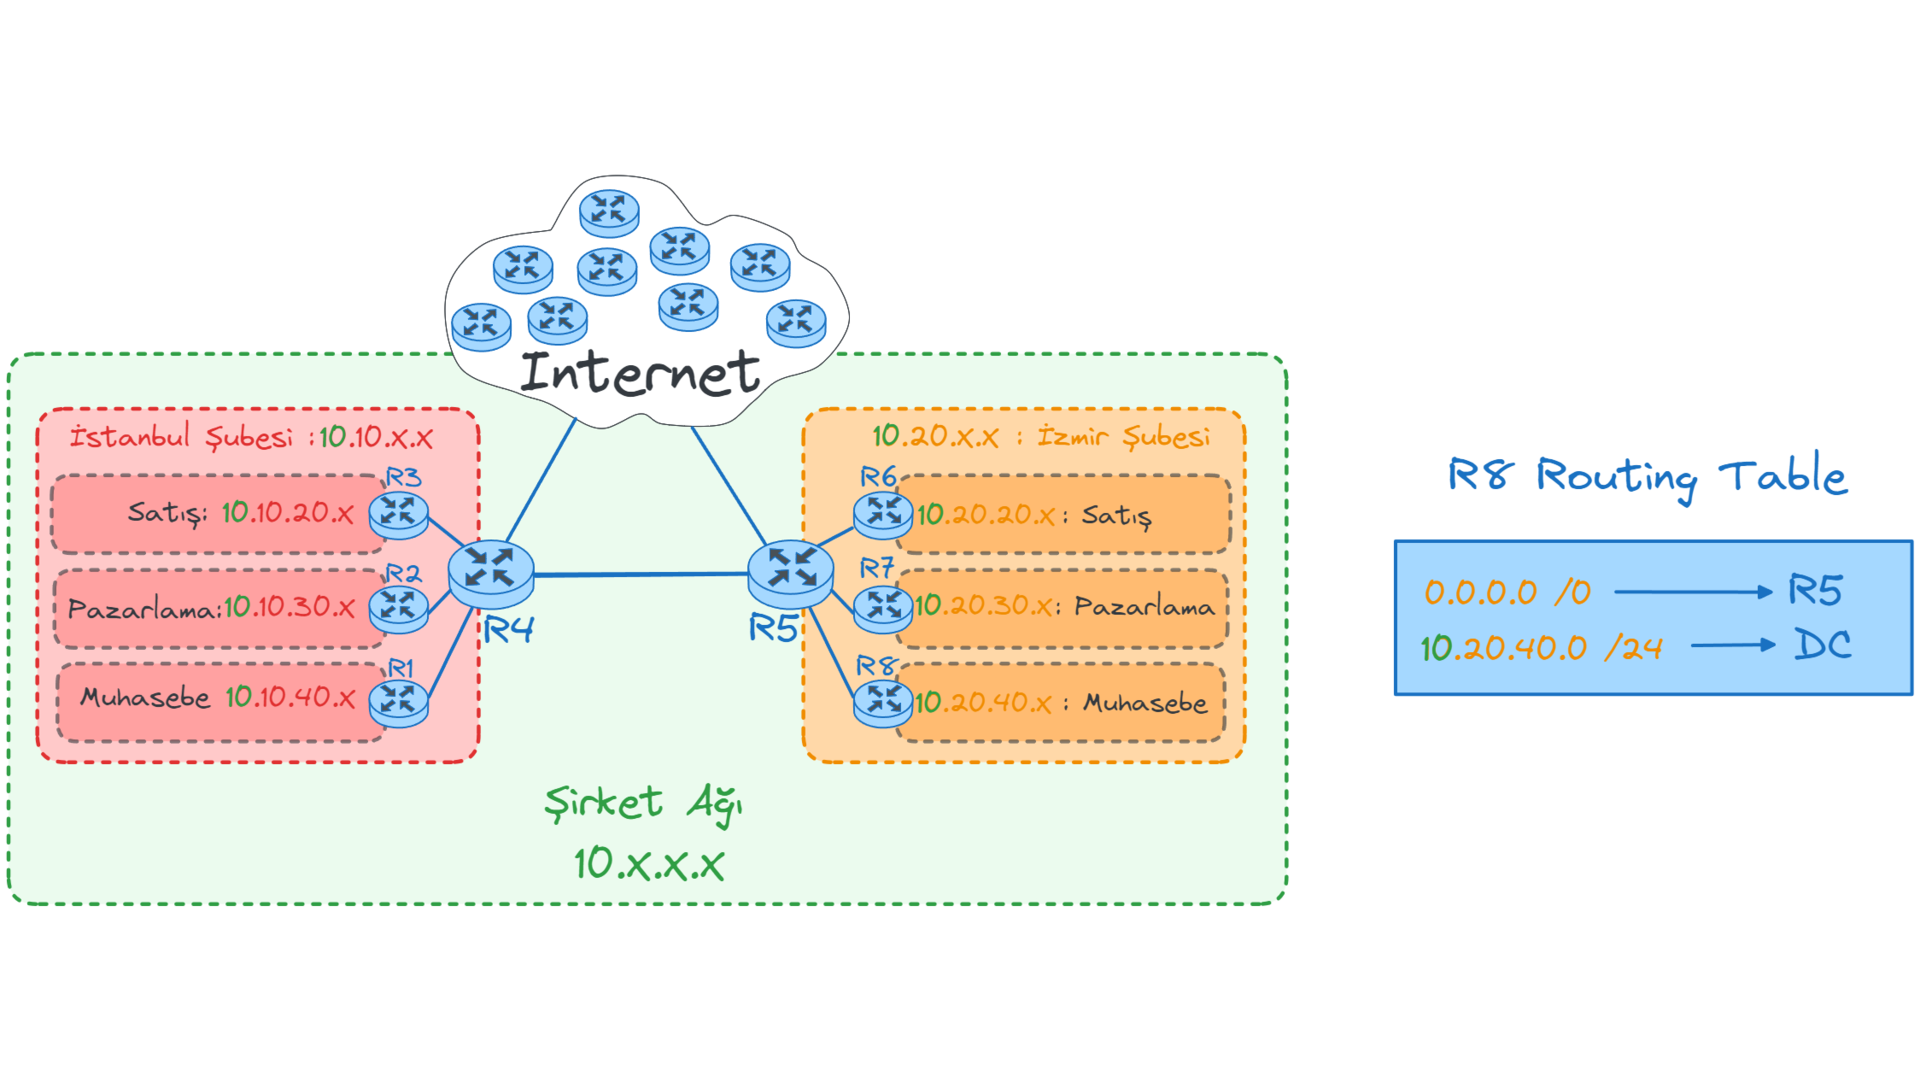 router-redirect9.webp